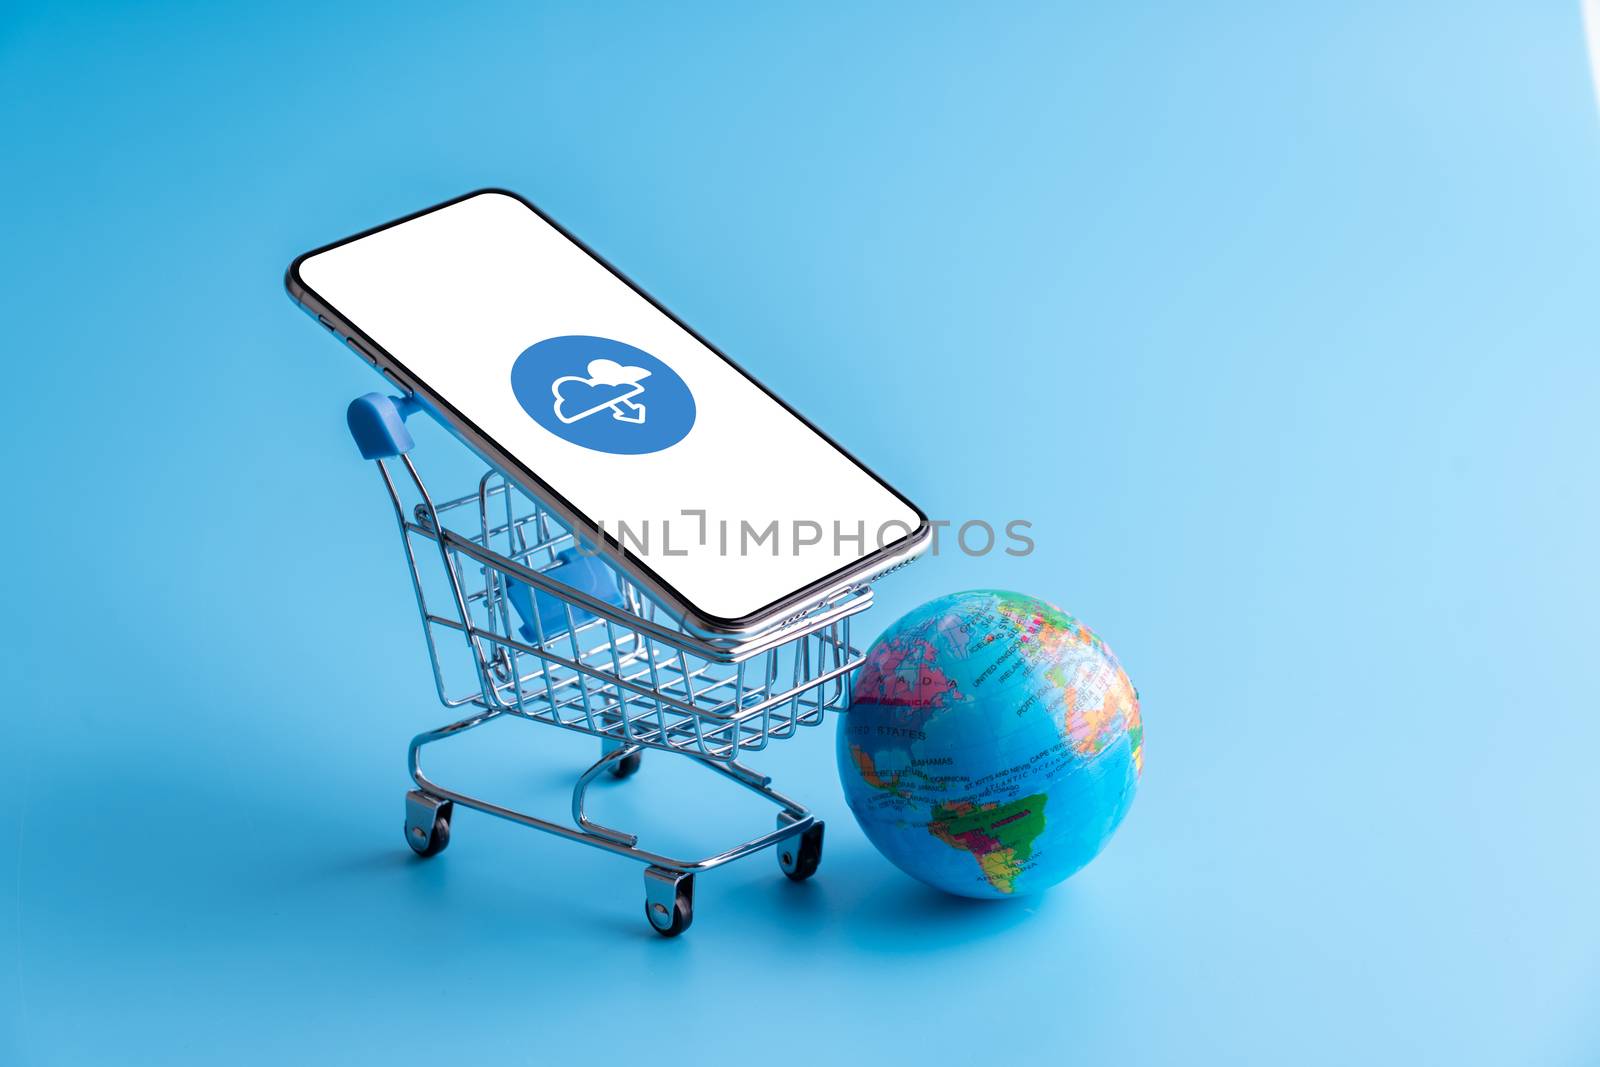 Online shopping & cloud icon on mobile phone application